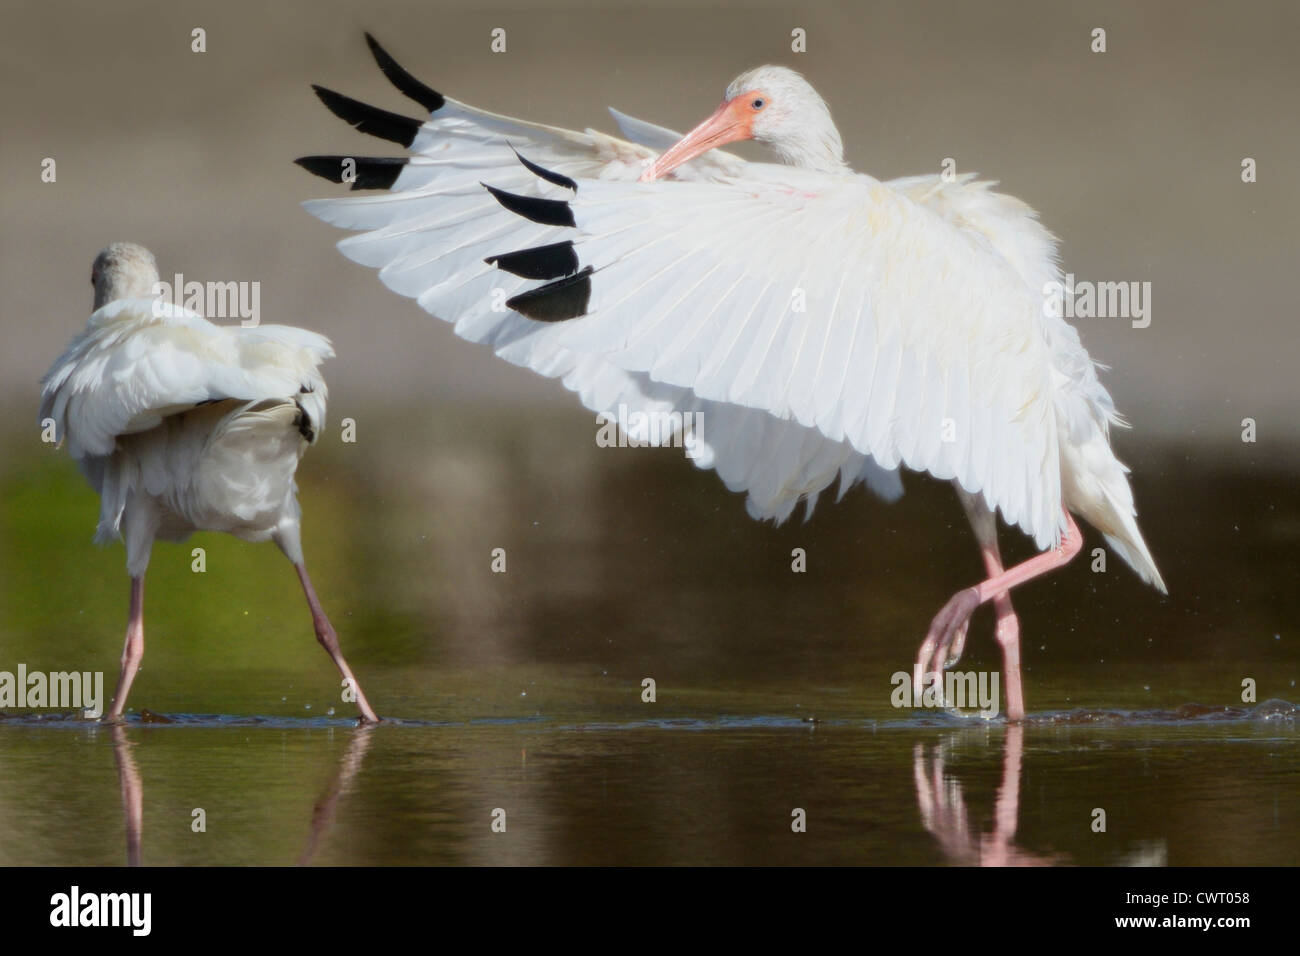 American White Ibis getting ready to fly Stock Photo